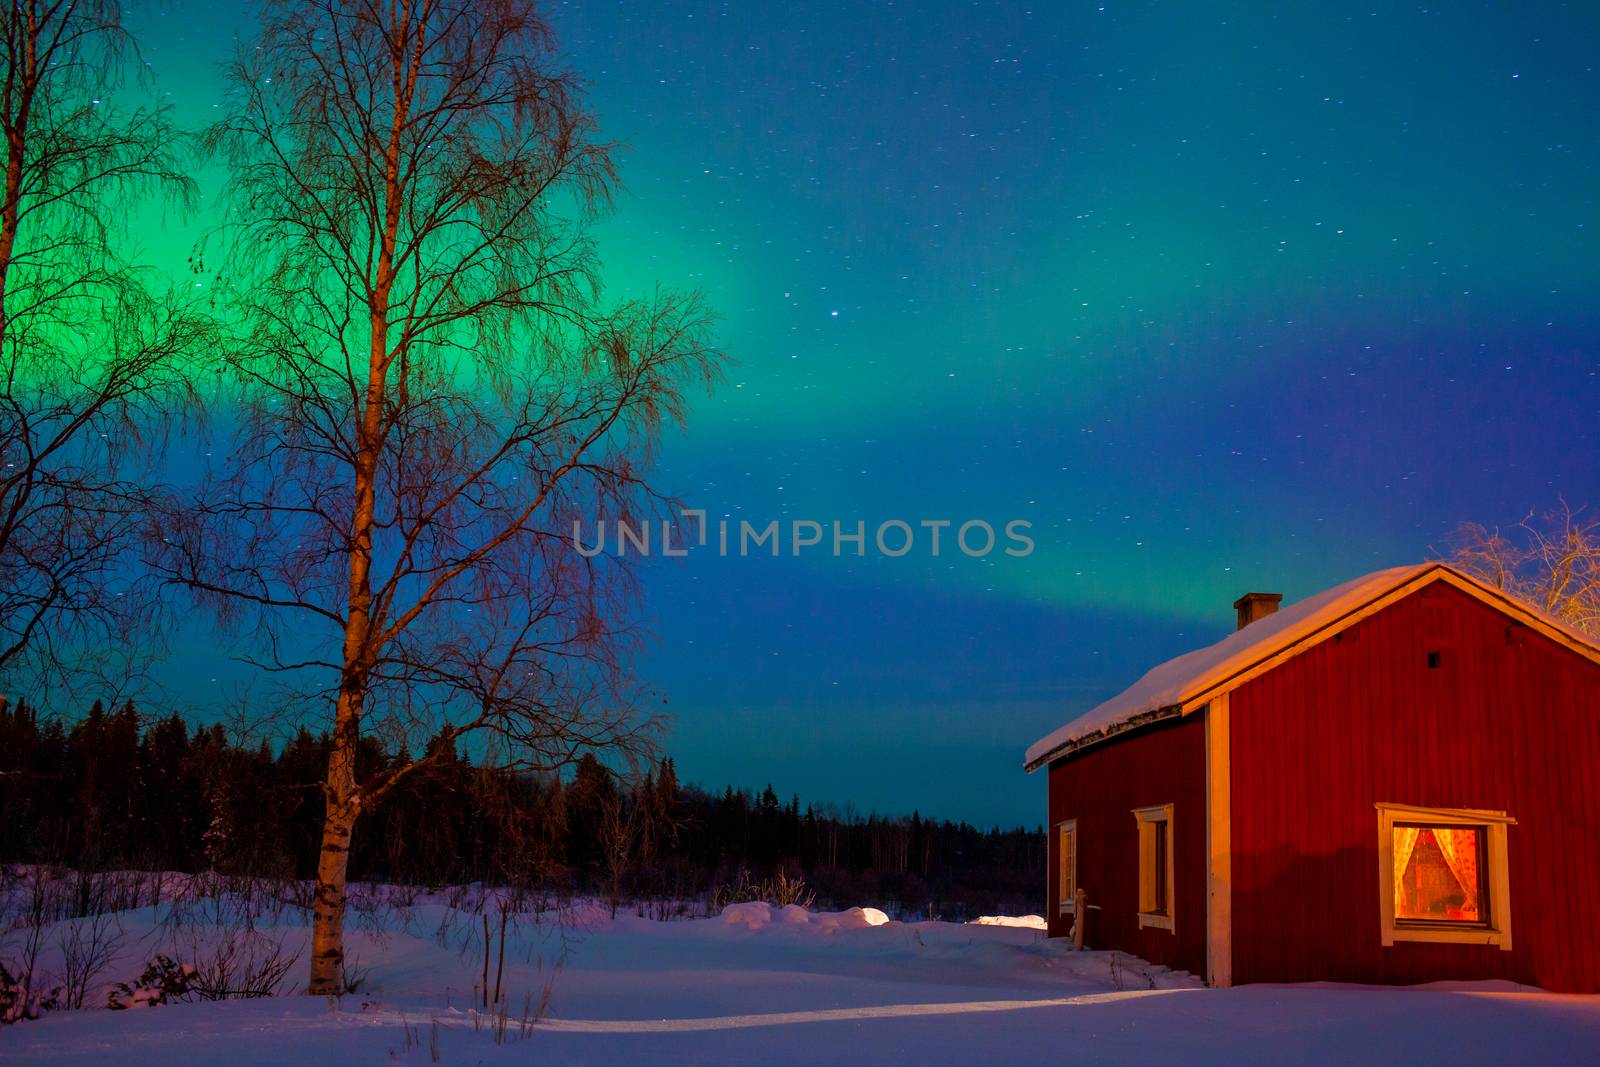 Intense northern lights - Aurora borealis over Lake and red House in Finland